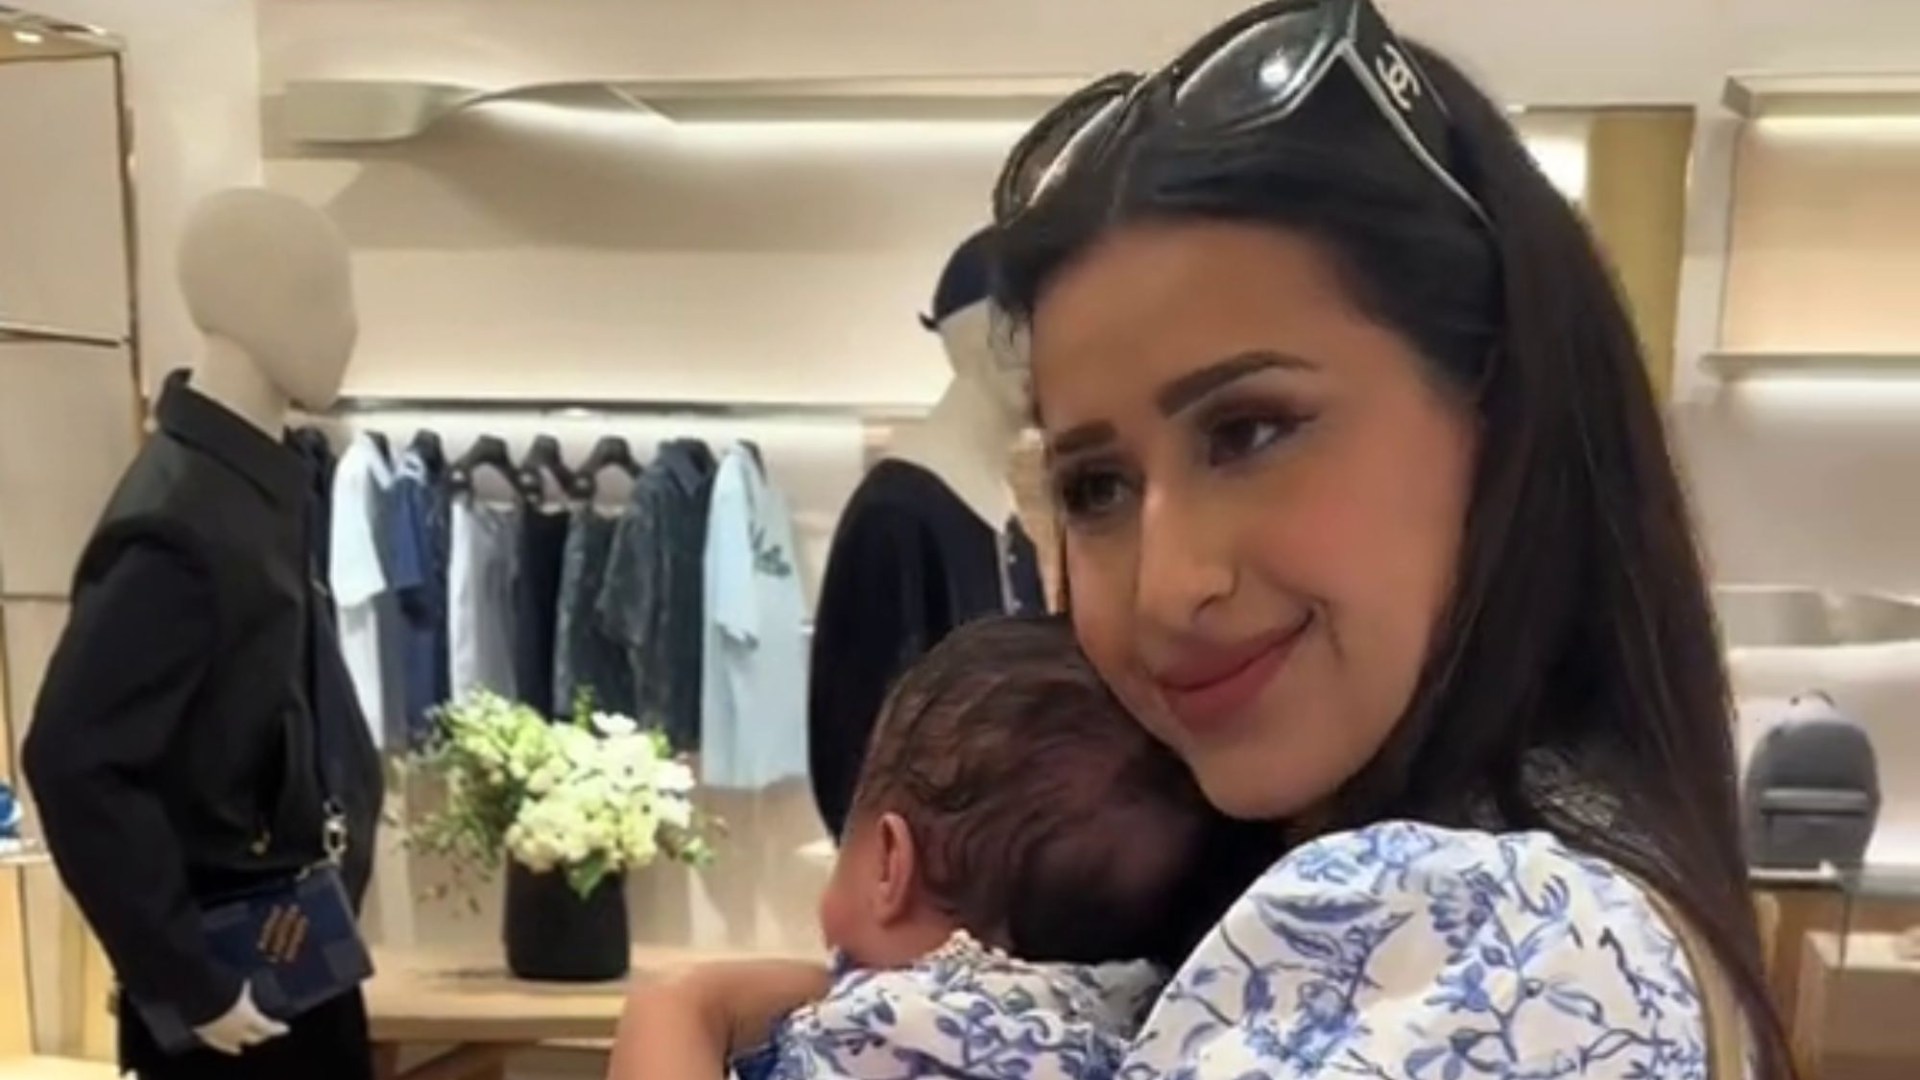 Im a rich housewife & my hubby pays me 55k a month to be a mum - Im too busy shopping though so the nanny does it all [Video]